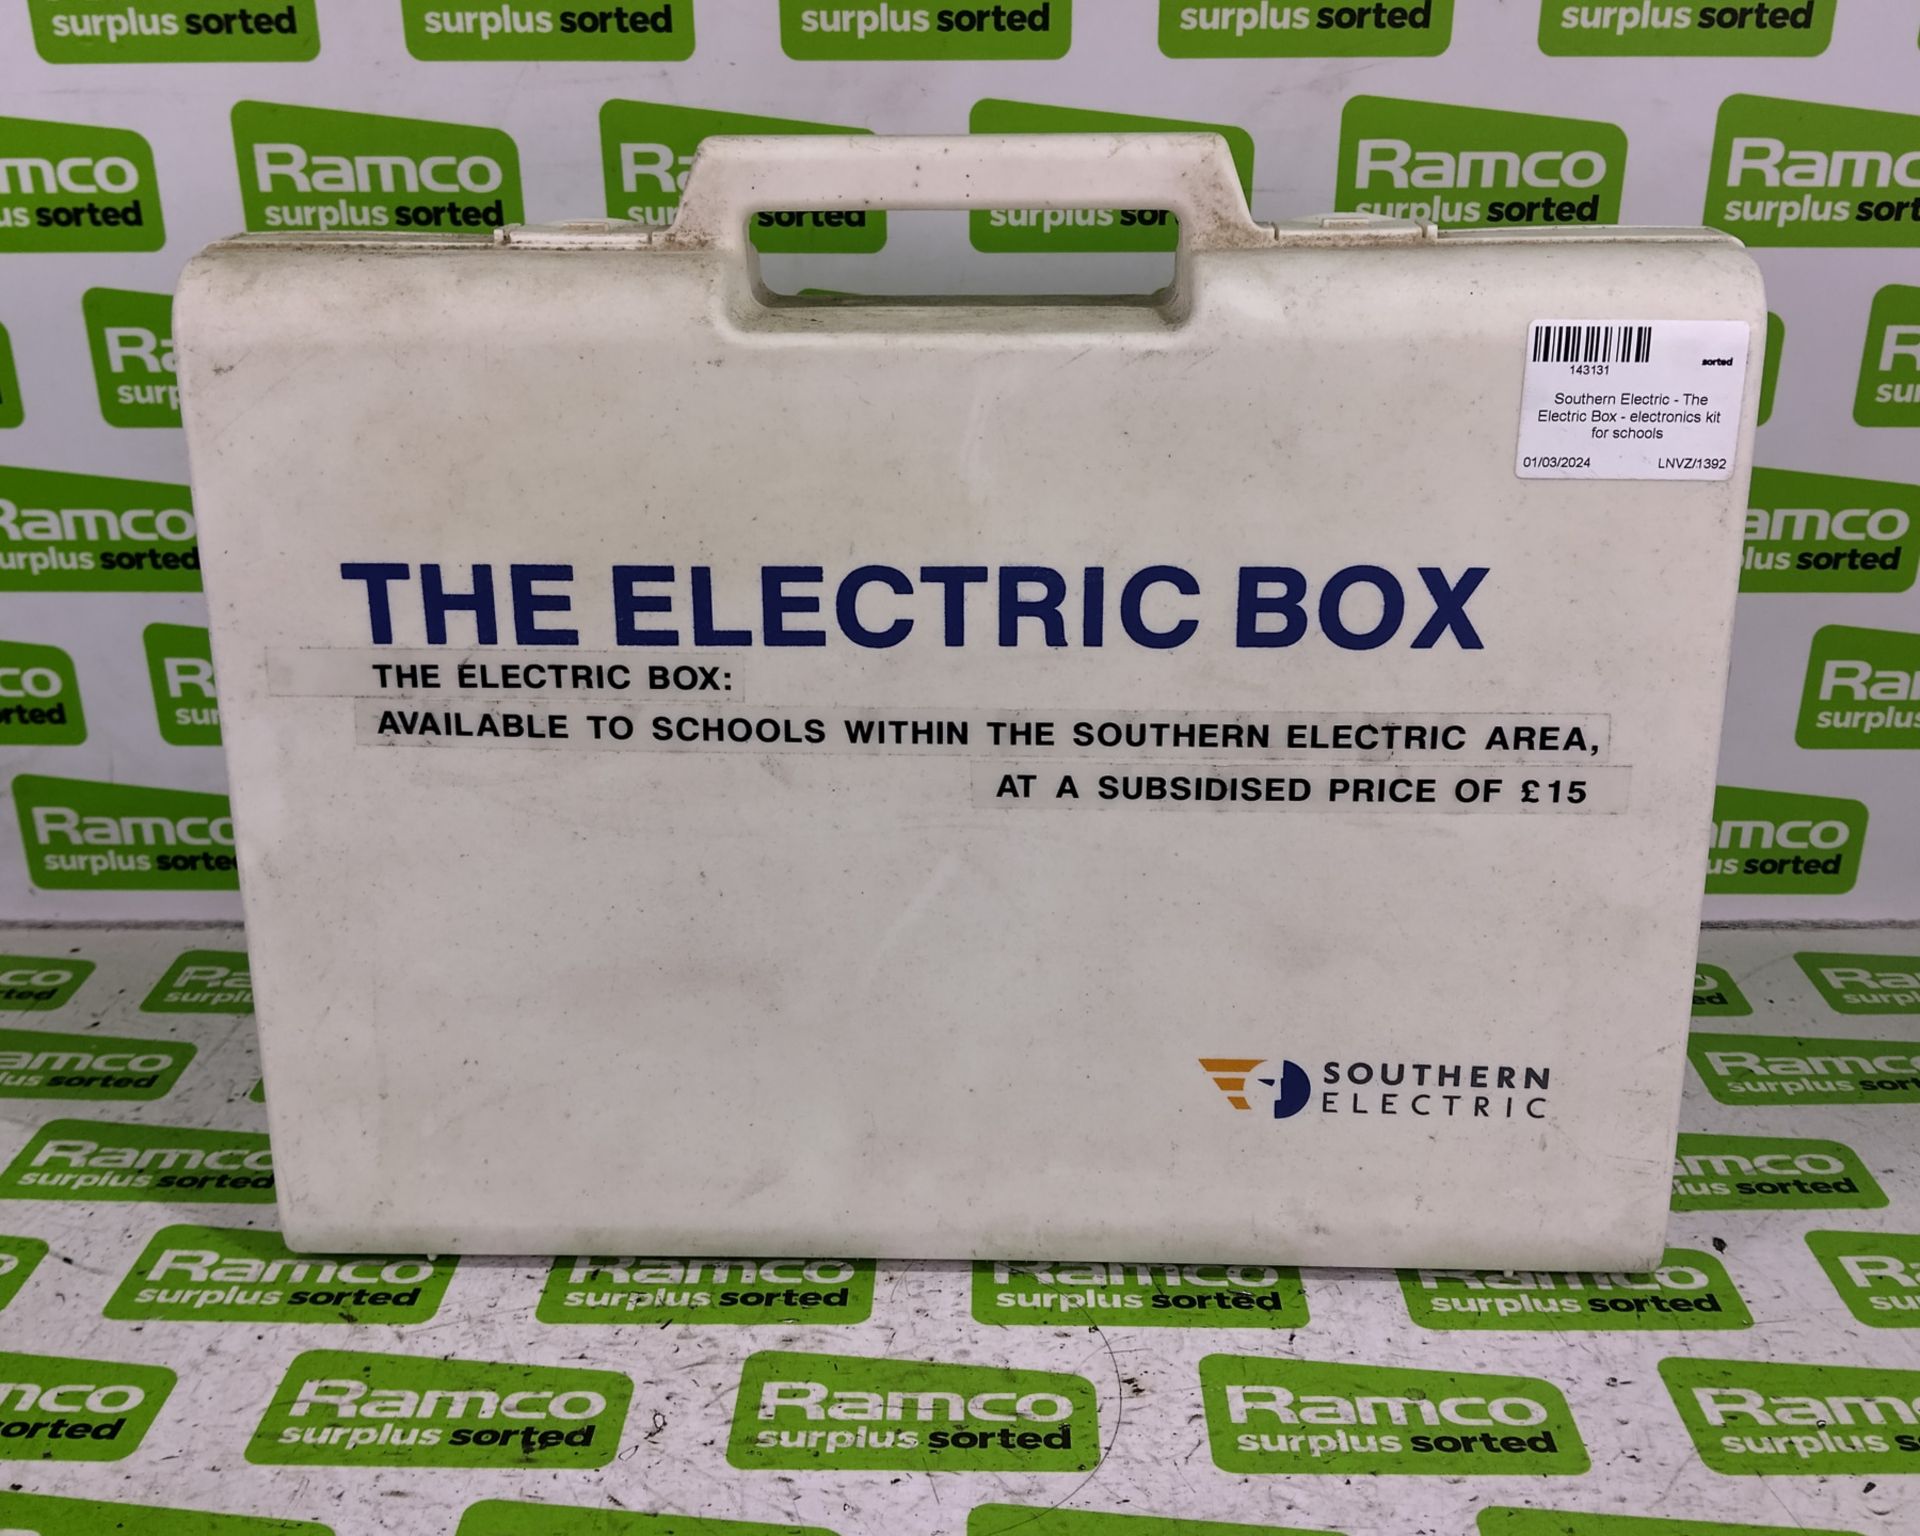 Southern Electric - The Electric Box - electronics kit for schools - Bild 2 aus 4